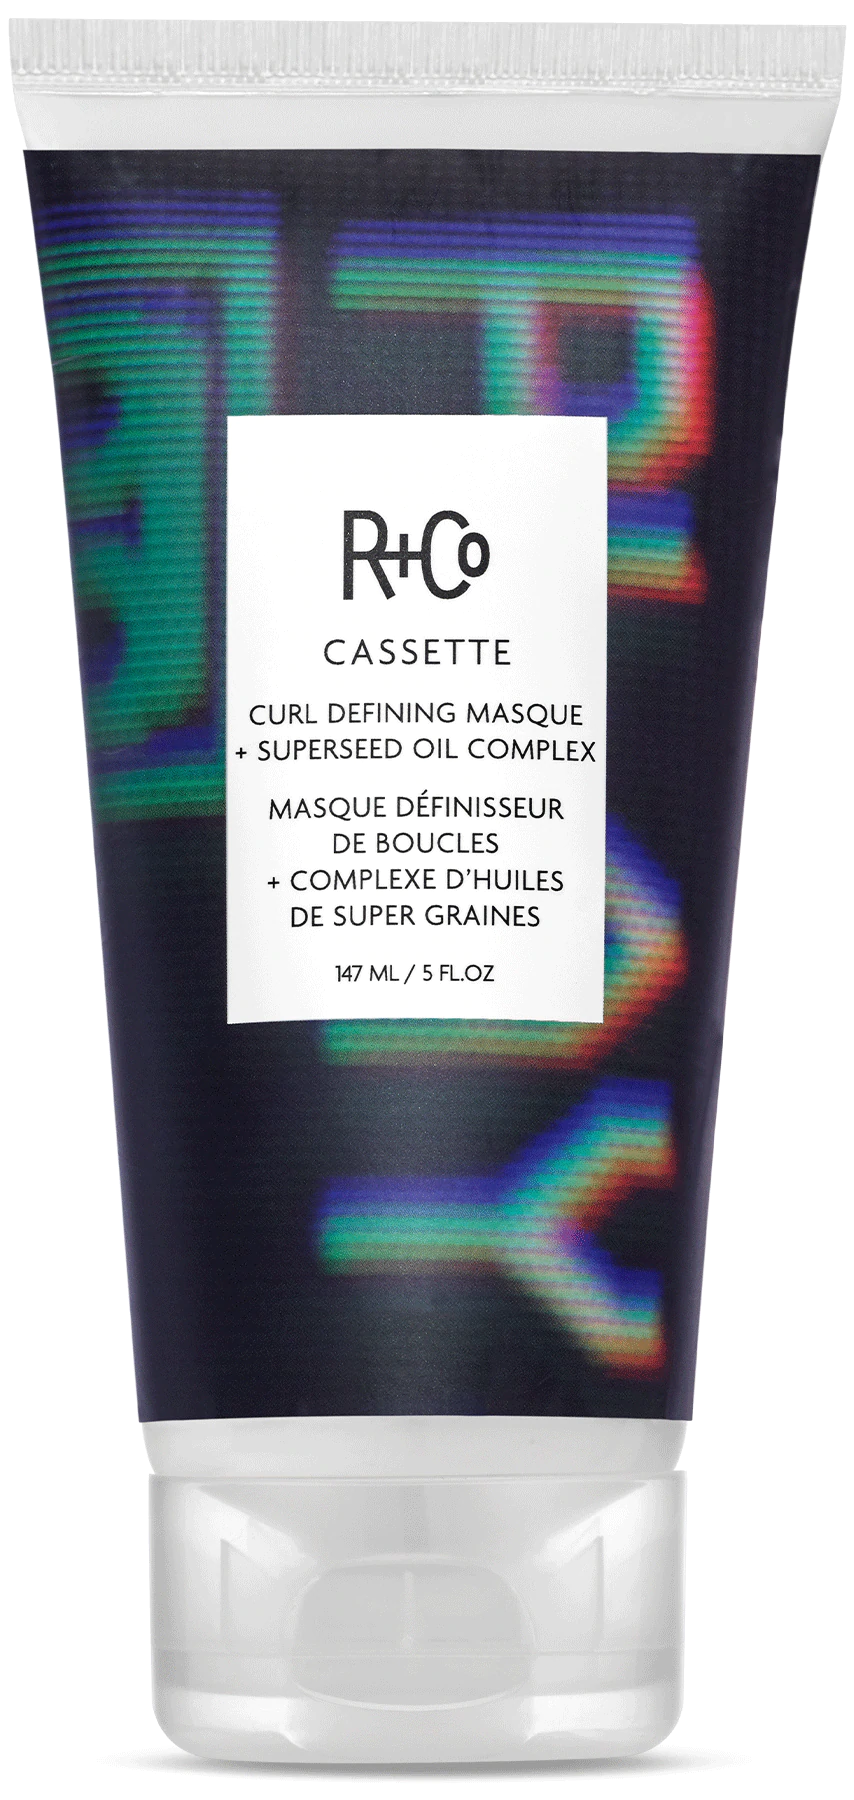 R+CO CASSETTE CURL DEFINING MASQUE - Totality Medispa and Skincare